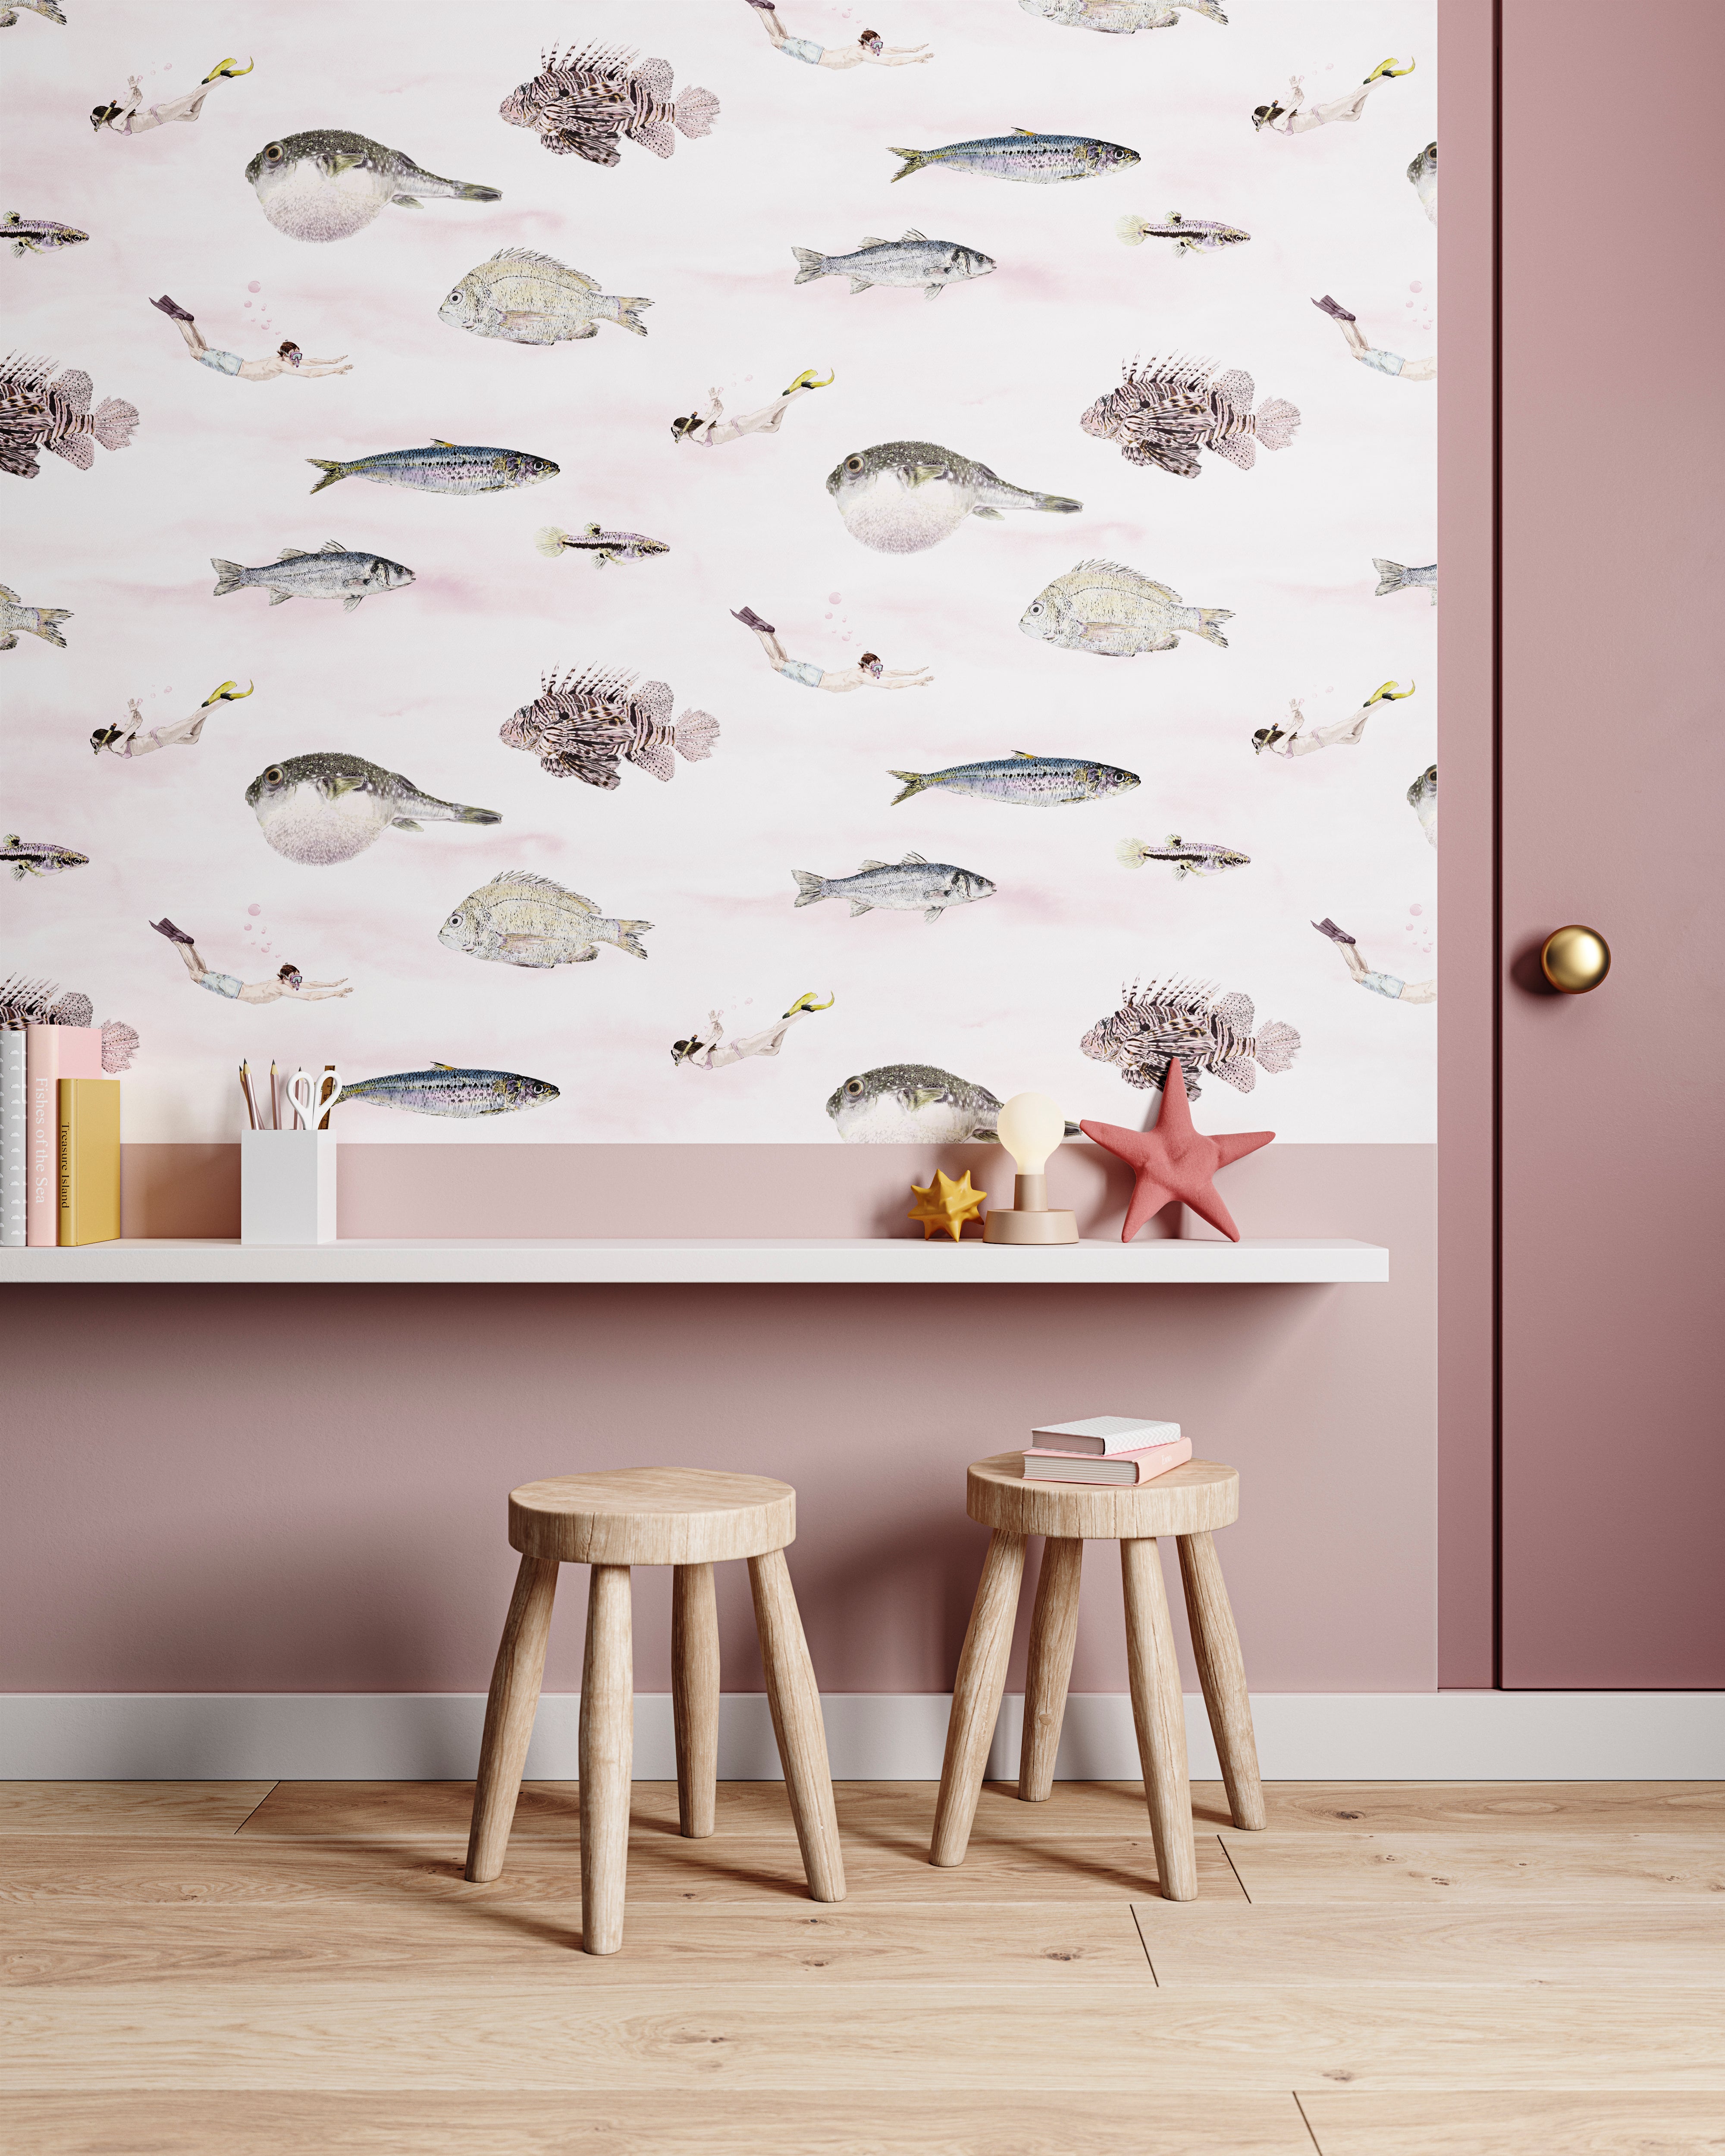 New Collection: Fish Wallpaper